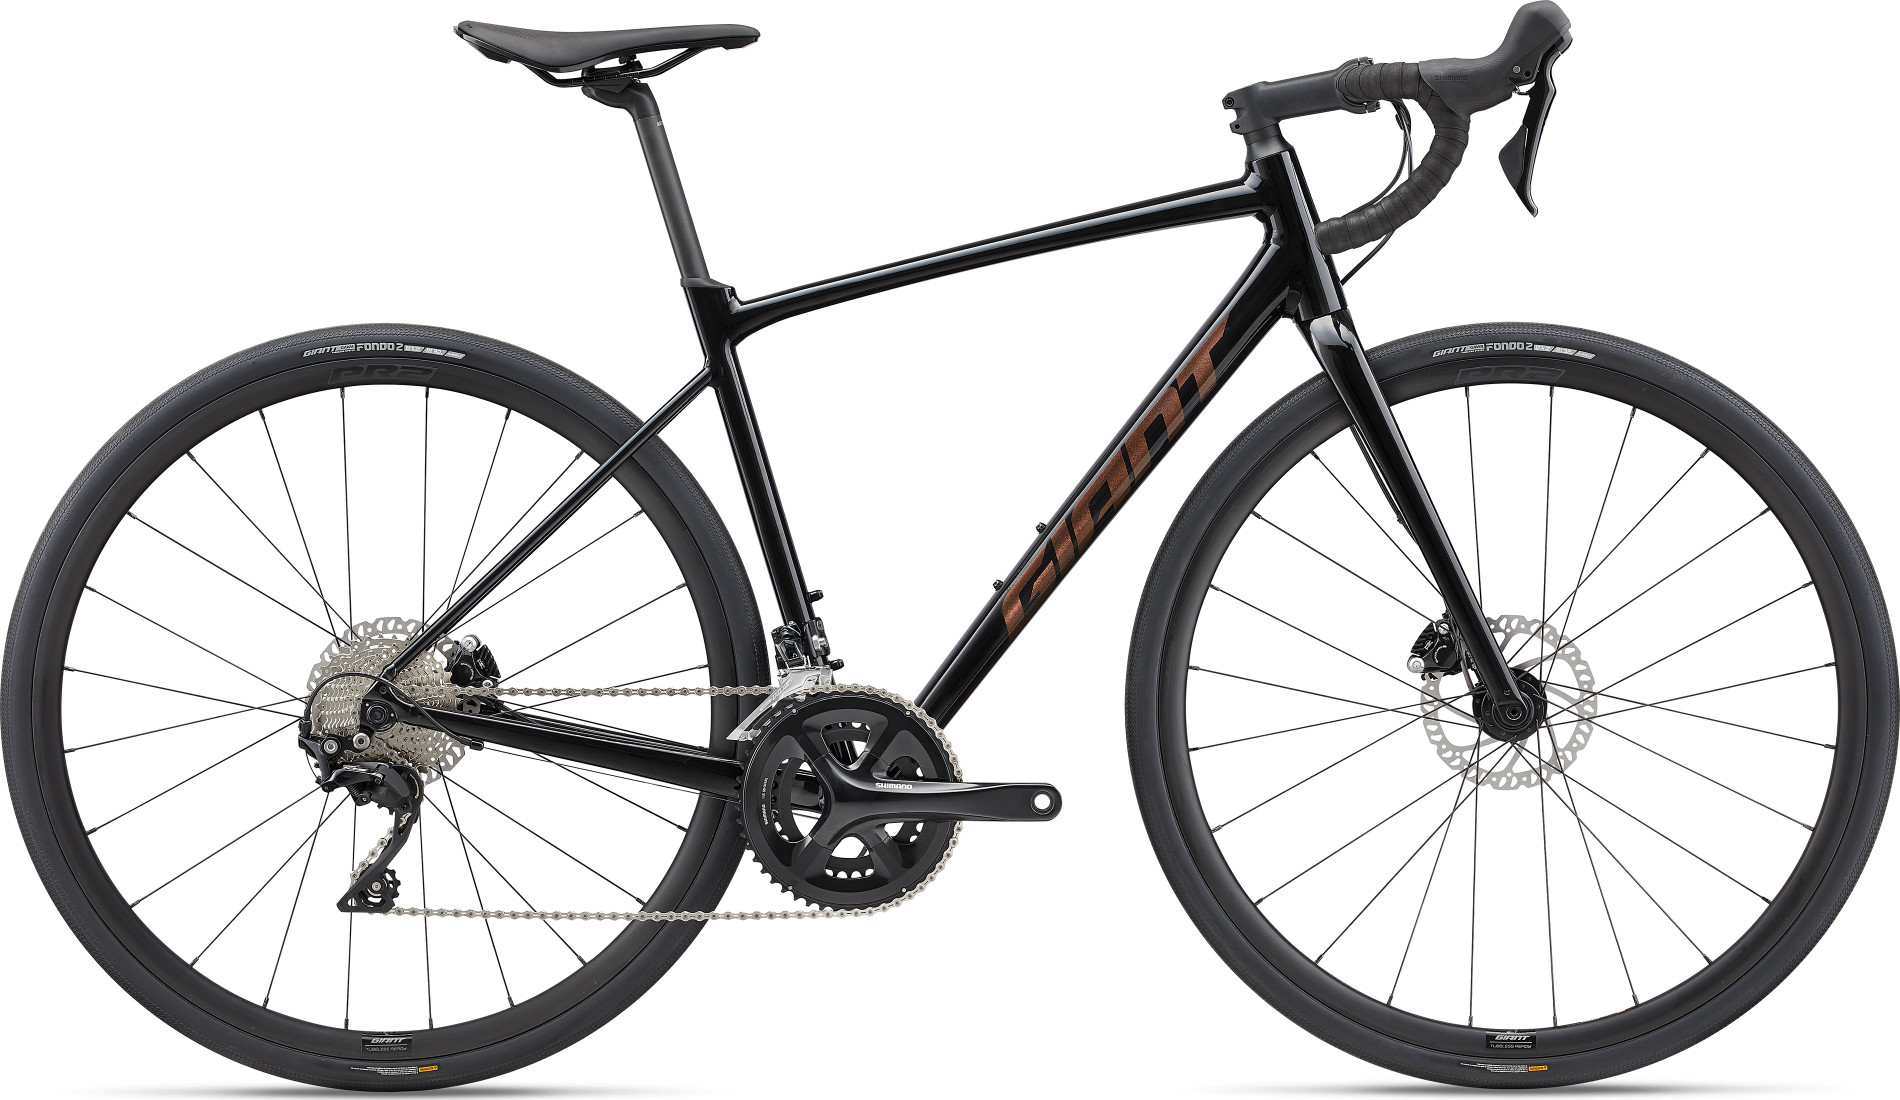 Black Giant Contend AR 1 road bike with Shimano 105 groupset and disc brakes